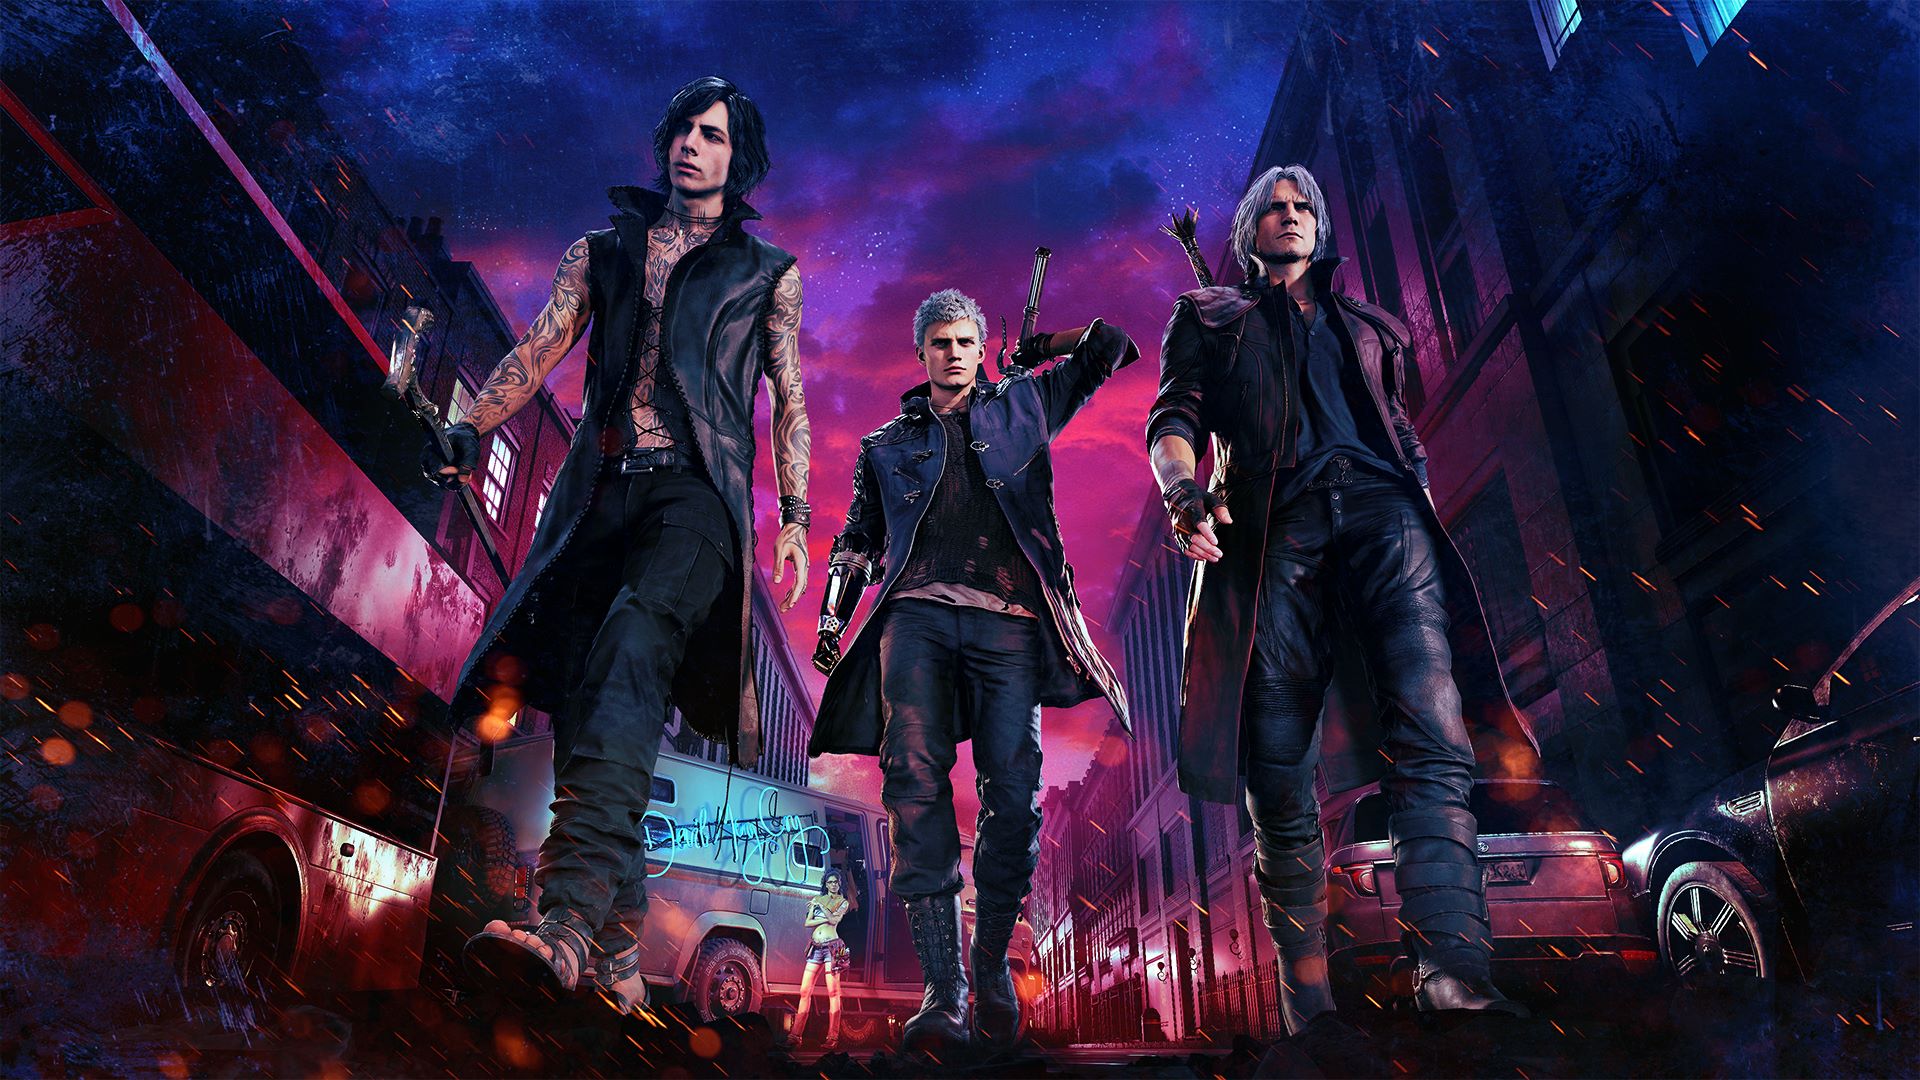 Devil May Cry 5 Deluxe Edition + 19 DLCs Repack Free Download